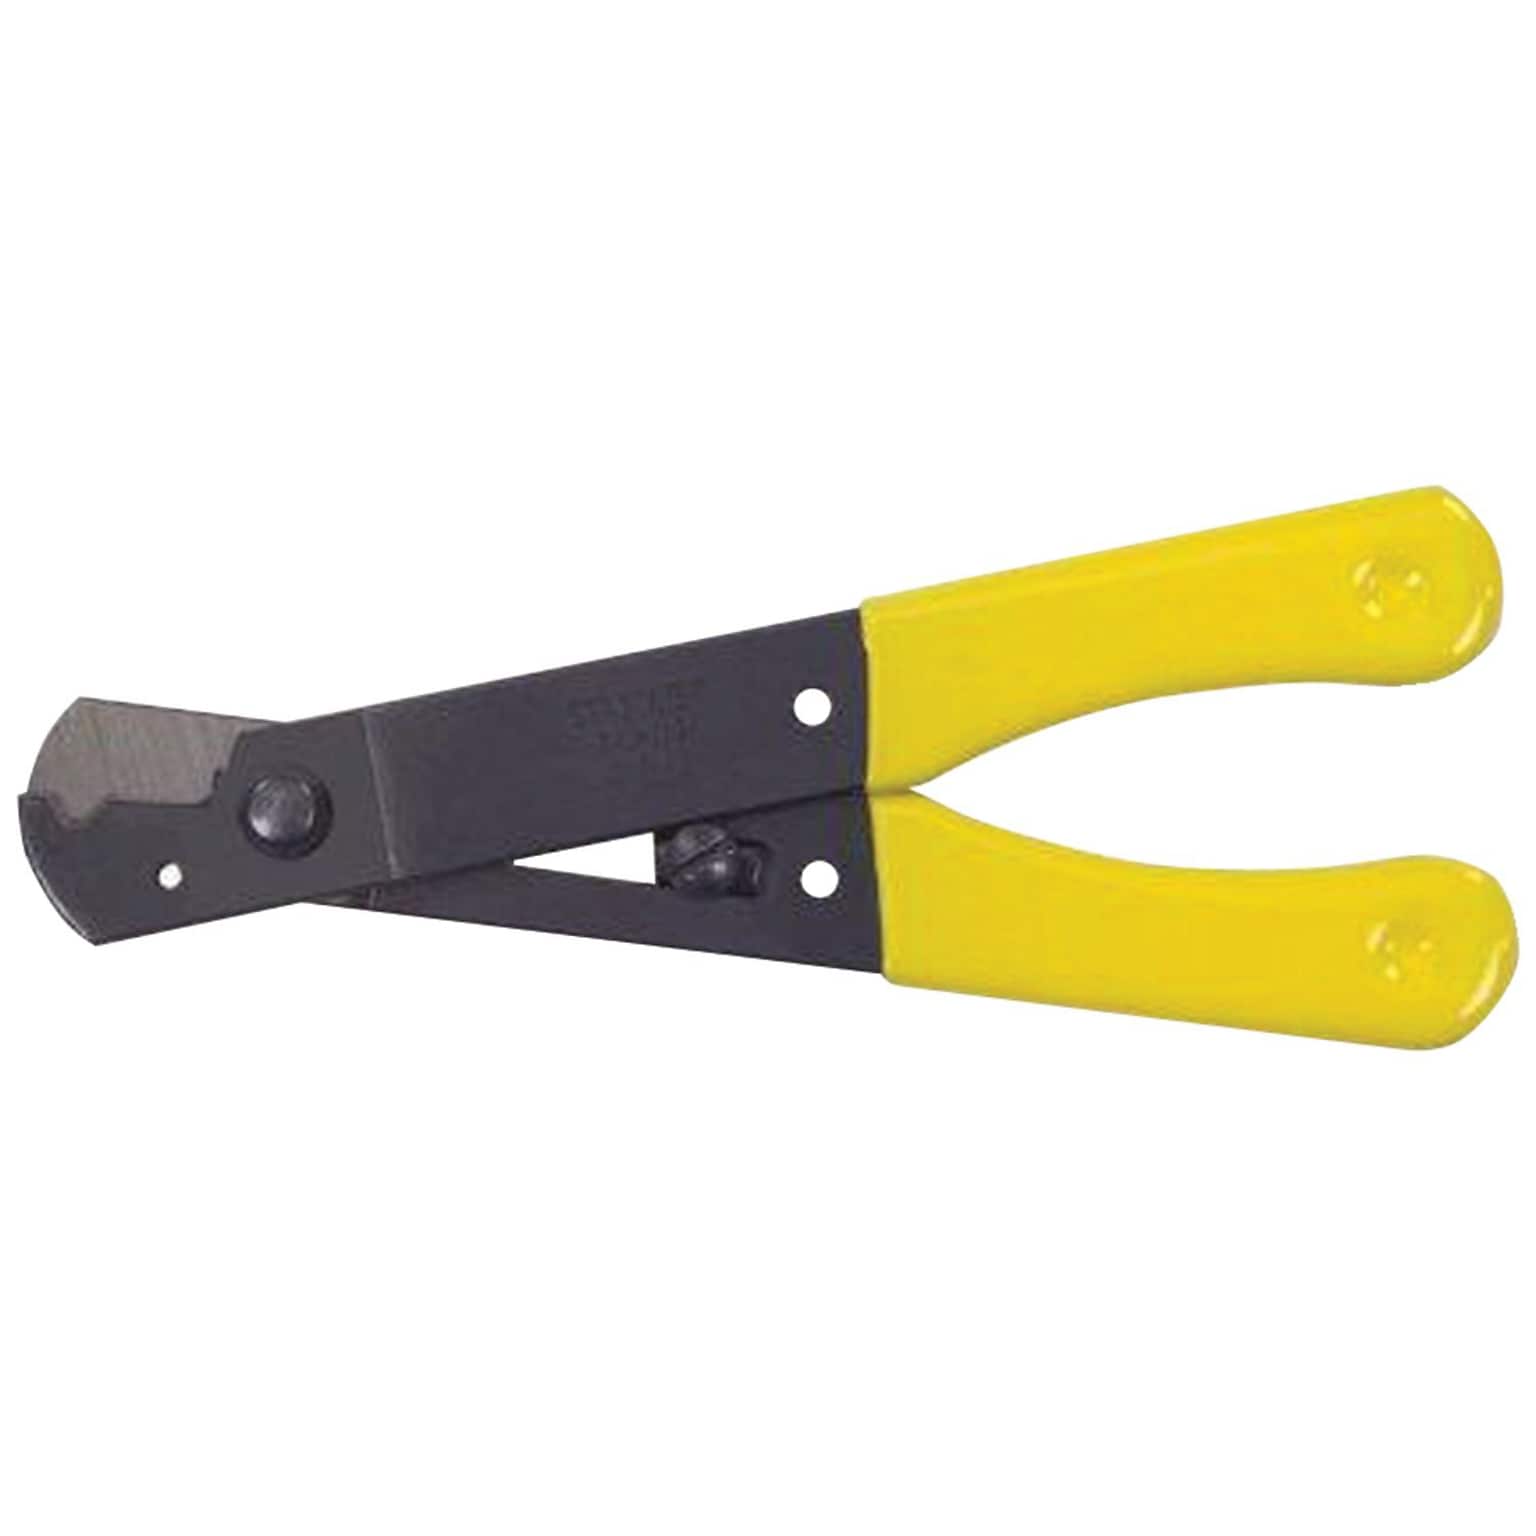 STANLEY® 84-213 Rust Resistant Finish Wire Stripper and Cutter With Comfortable Vinyl Grips